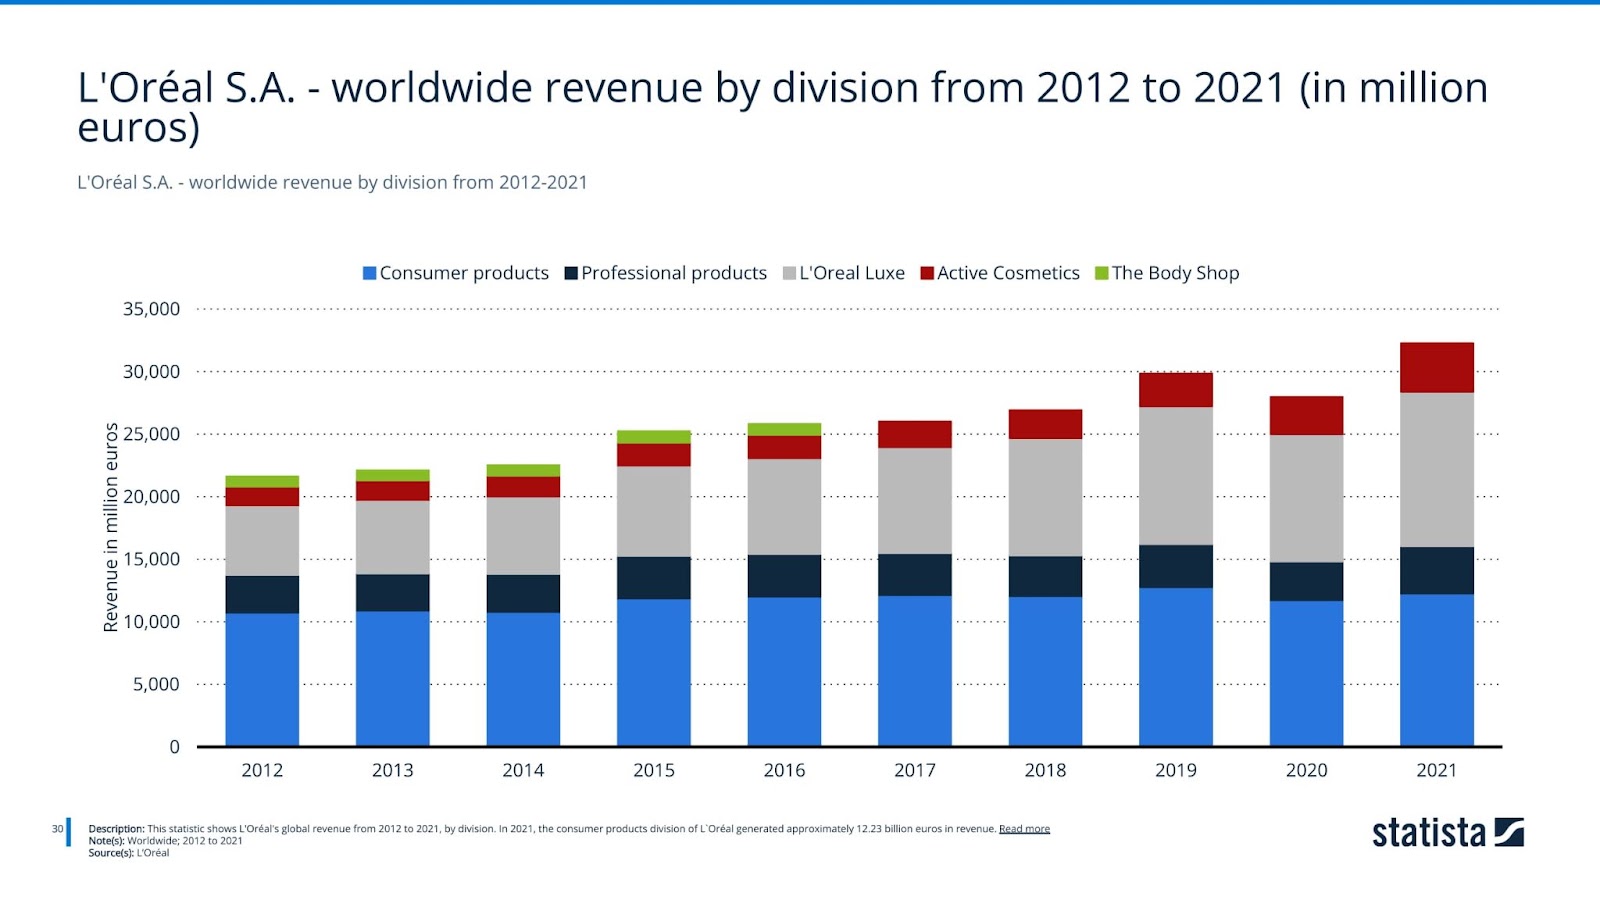 L'Oréal S.A. - worldwide revenue by division from 2012-2021